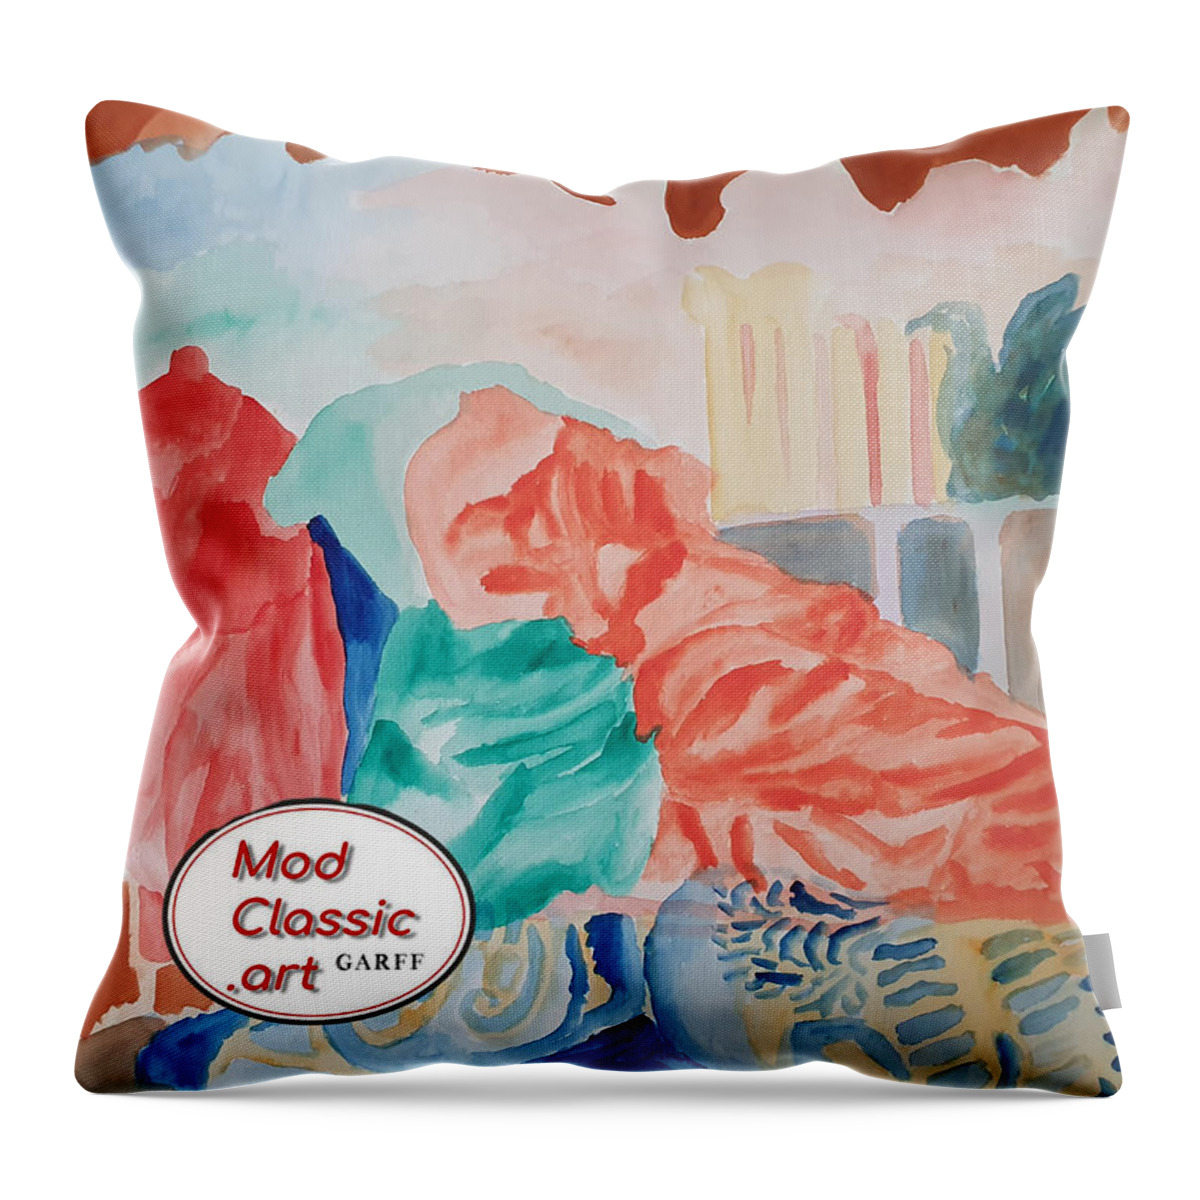 Masterpiece Paintings Throw Pillow featuring the painting Elysium ModClassic Art by Enrico Garff